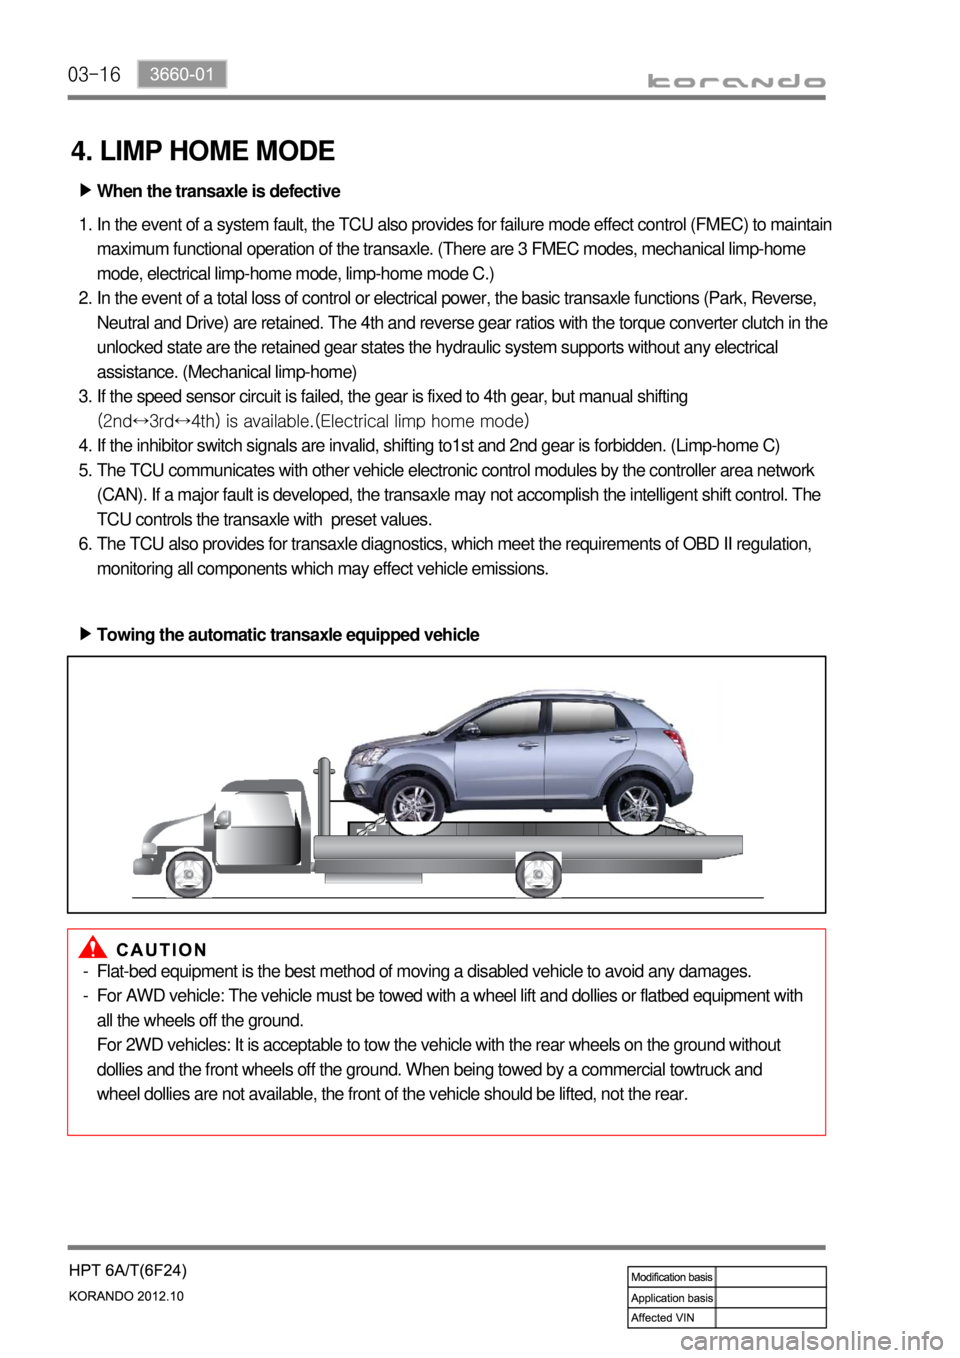 SSANGYONG KORANDO 2012  Service Manual 03-16
4. LIMP HOME MODE
When the transaxle is defective ▶
In the event of a system fault, the TCU also provides for failure mode effect control (FMEC) to maintain 
maximum functional operation of th